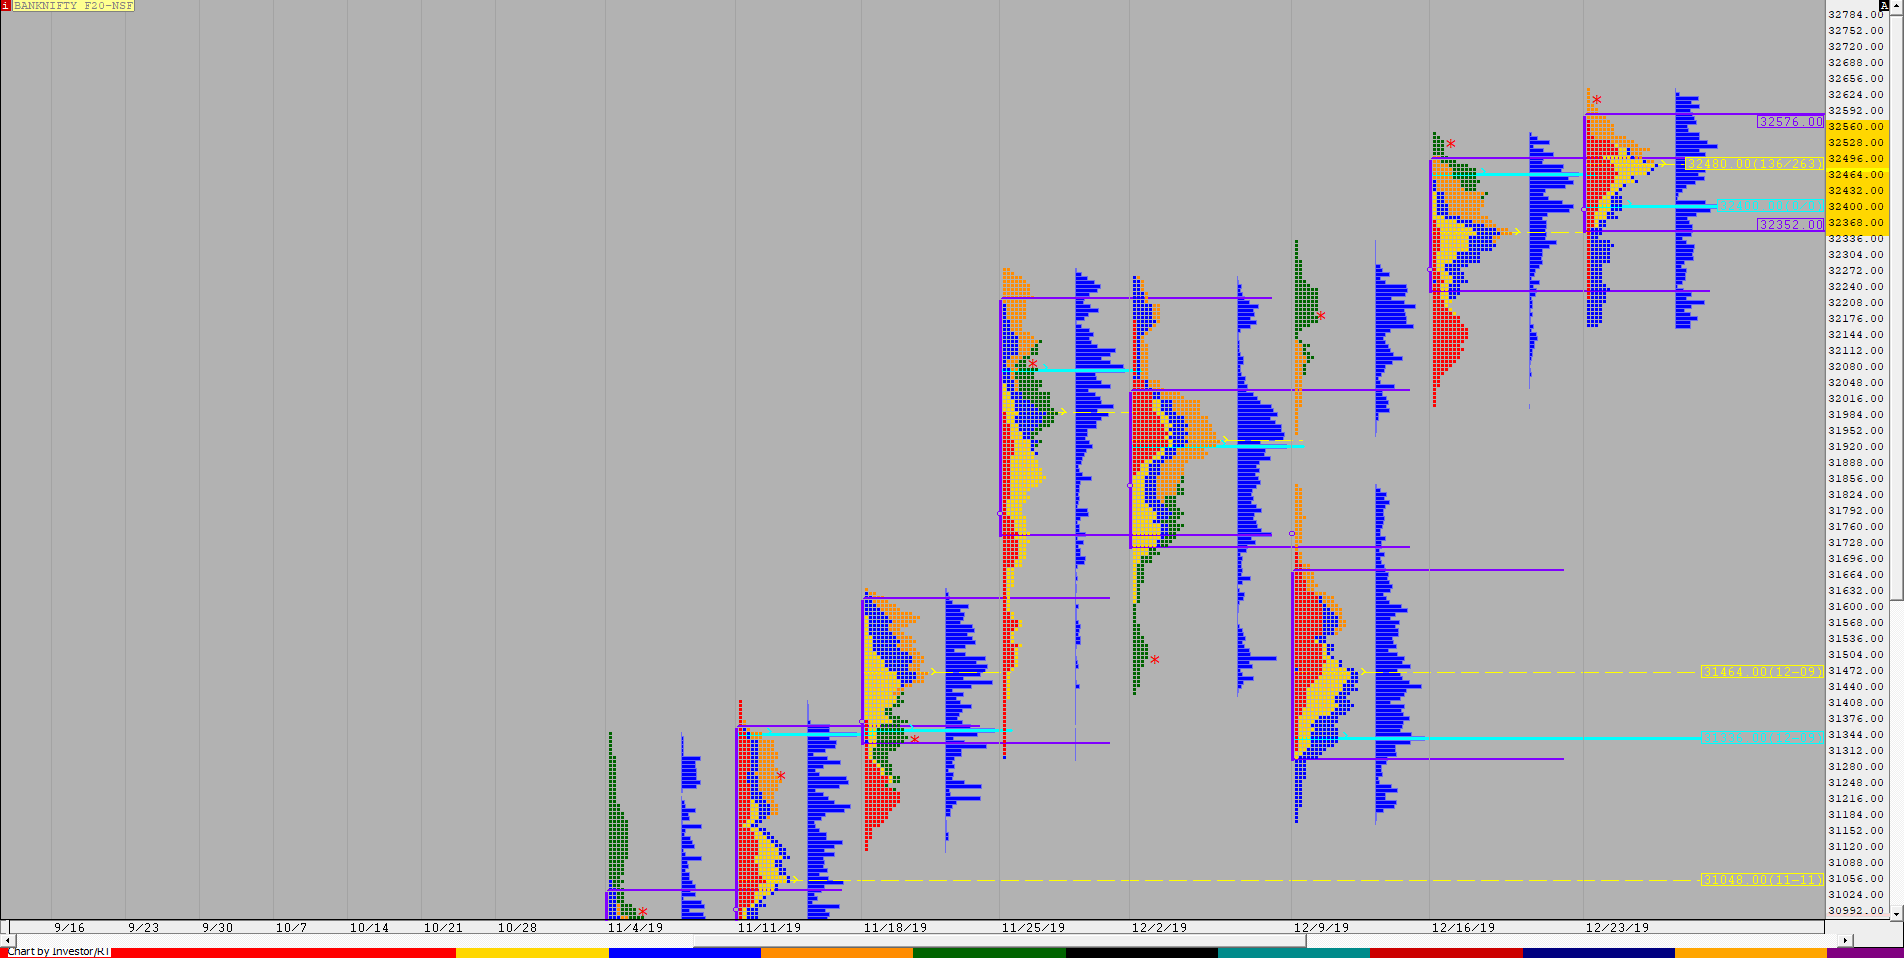 Bnf F 1 1 Weekly Charts (23Rd To 27Th December) And Market Profile Analysis Banknifty Futures, Charts, Day Trading, Intraday Trading, Intraday Trading Strategies, Market Profile, Market Profile Trading Strategies, Nifty Futures, Order Flow Analysis, Support And Resistance, Technical Analysis, Trading Strategies, Volume Profile Trading